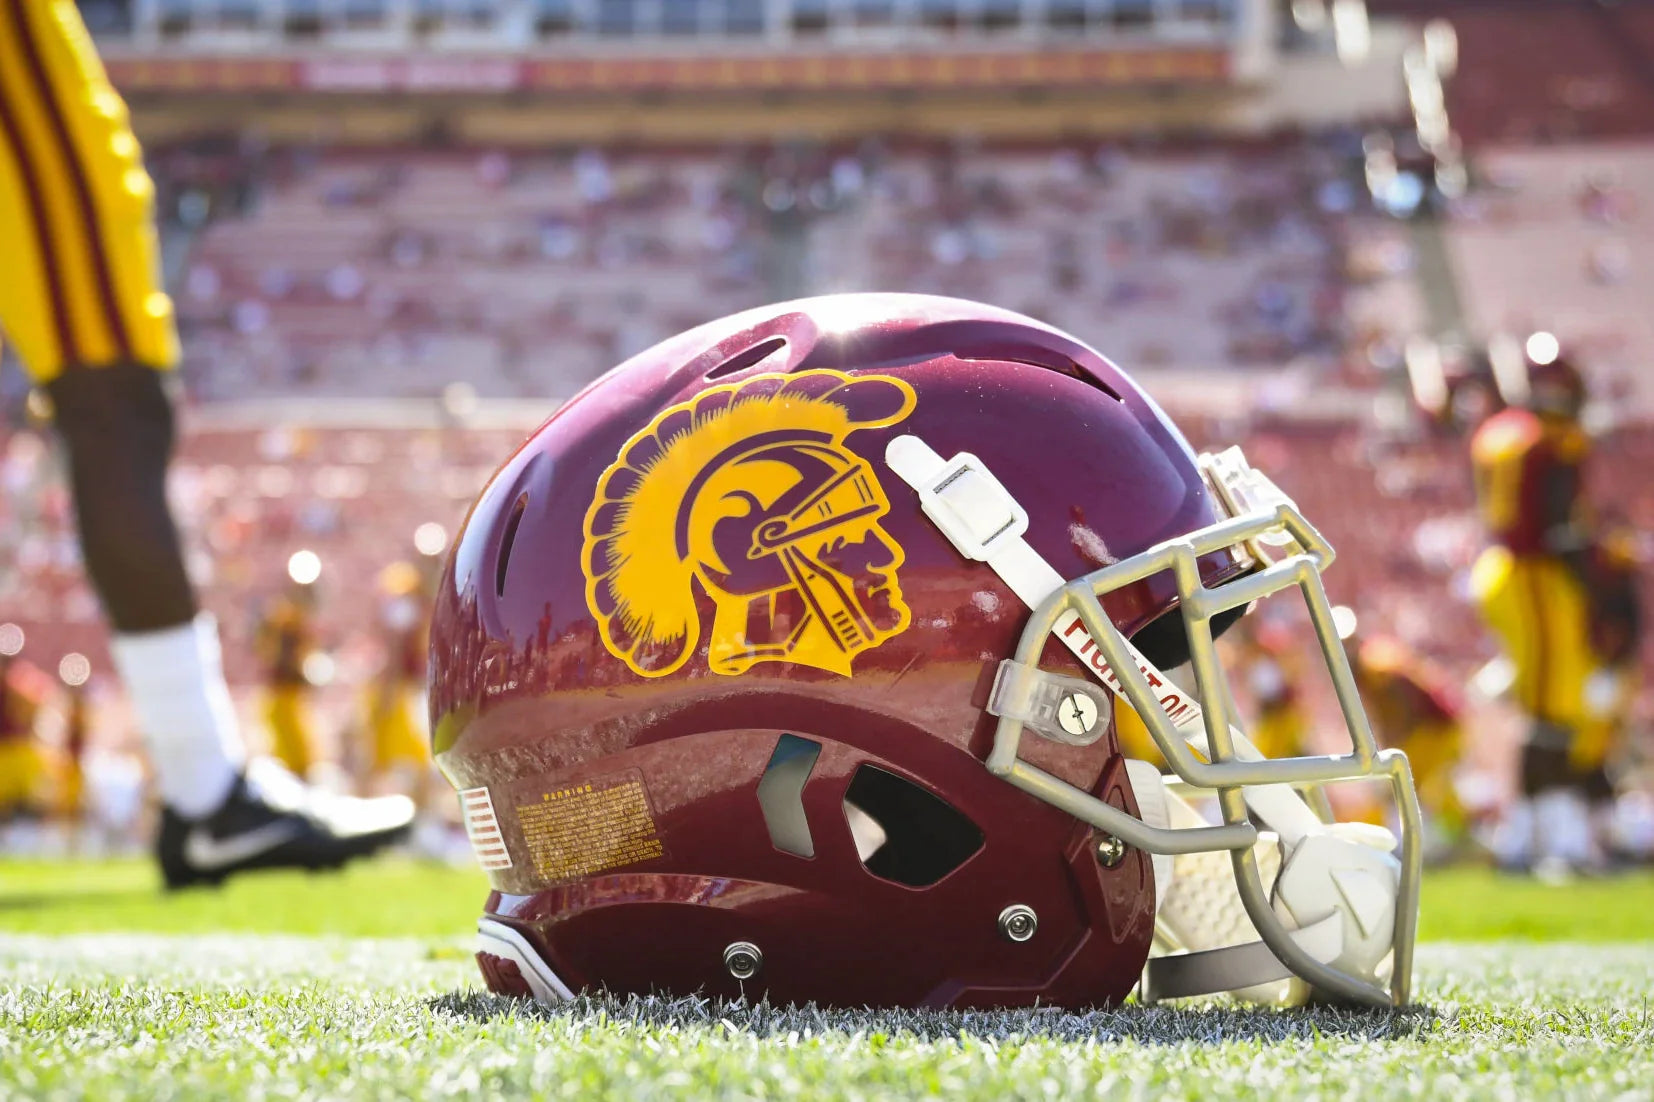 Ekrin Athletics Becomes USC's Official Recovery Partner